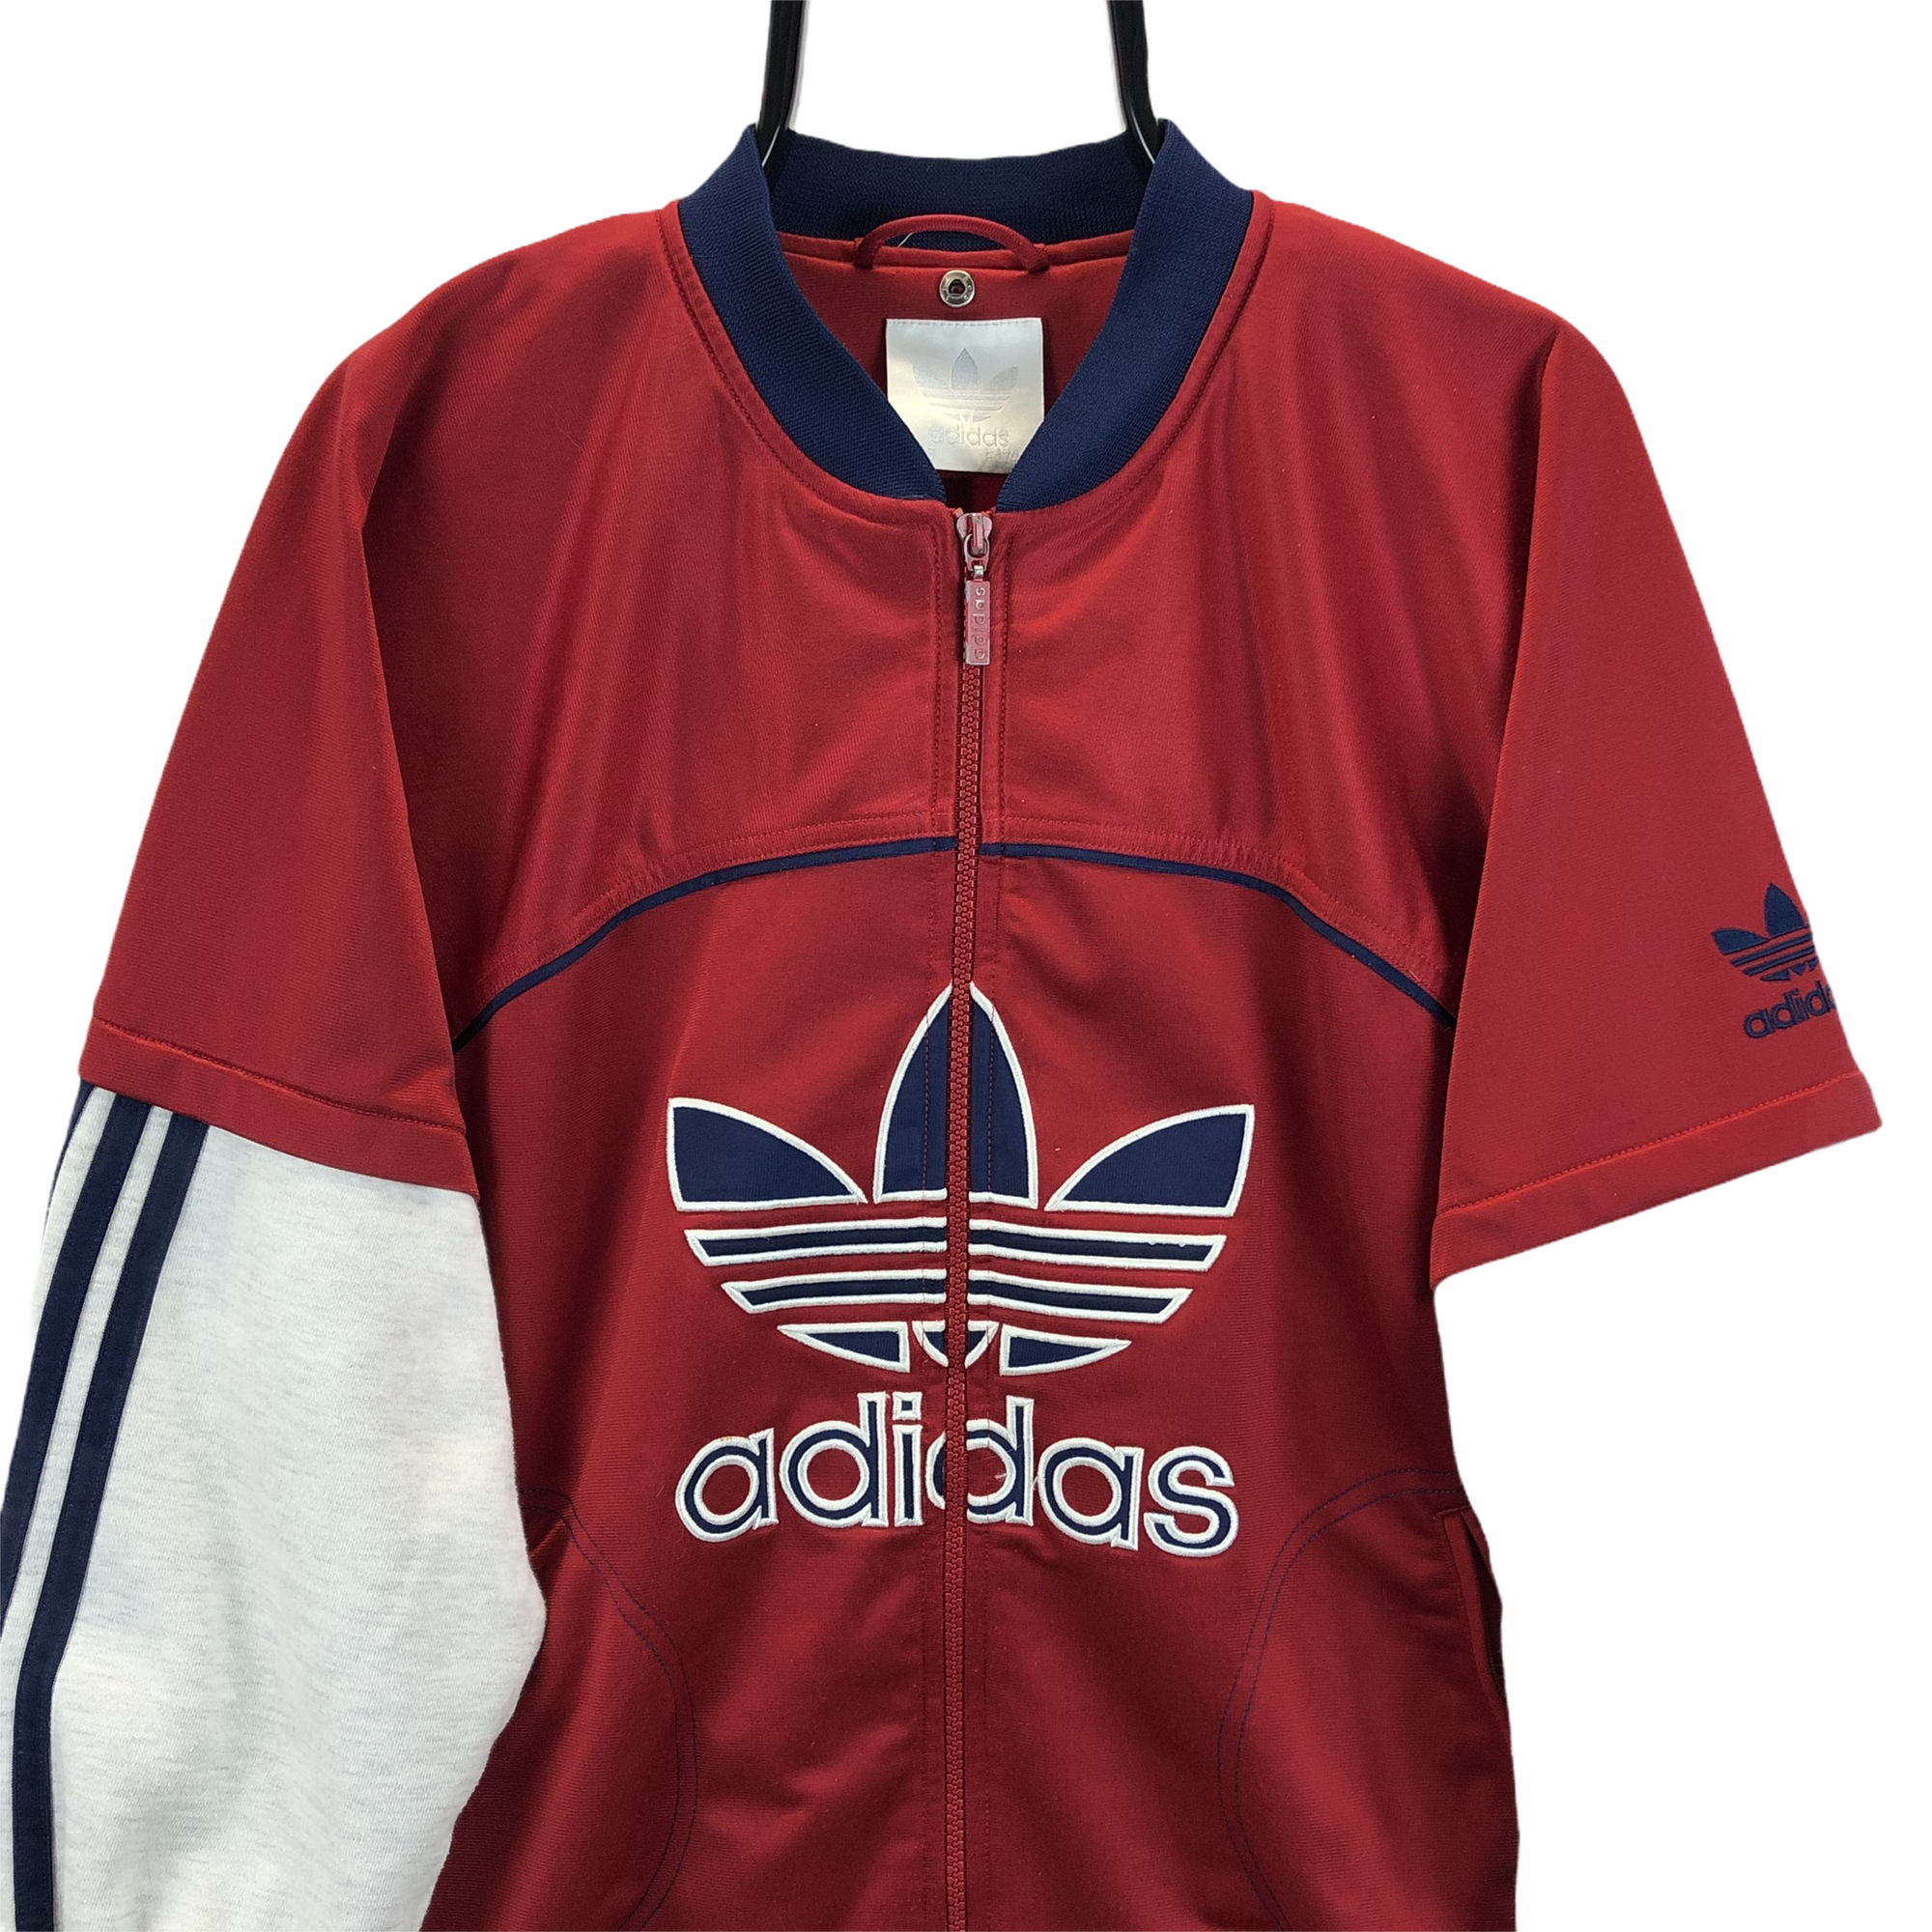 Vintage 90s Adidas Spellout Track Jacket in Red/Navy/Grey - Men's Medium/Women's Large